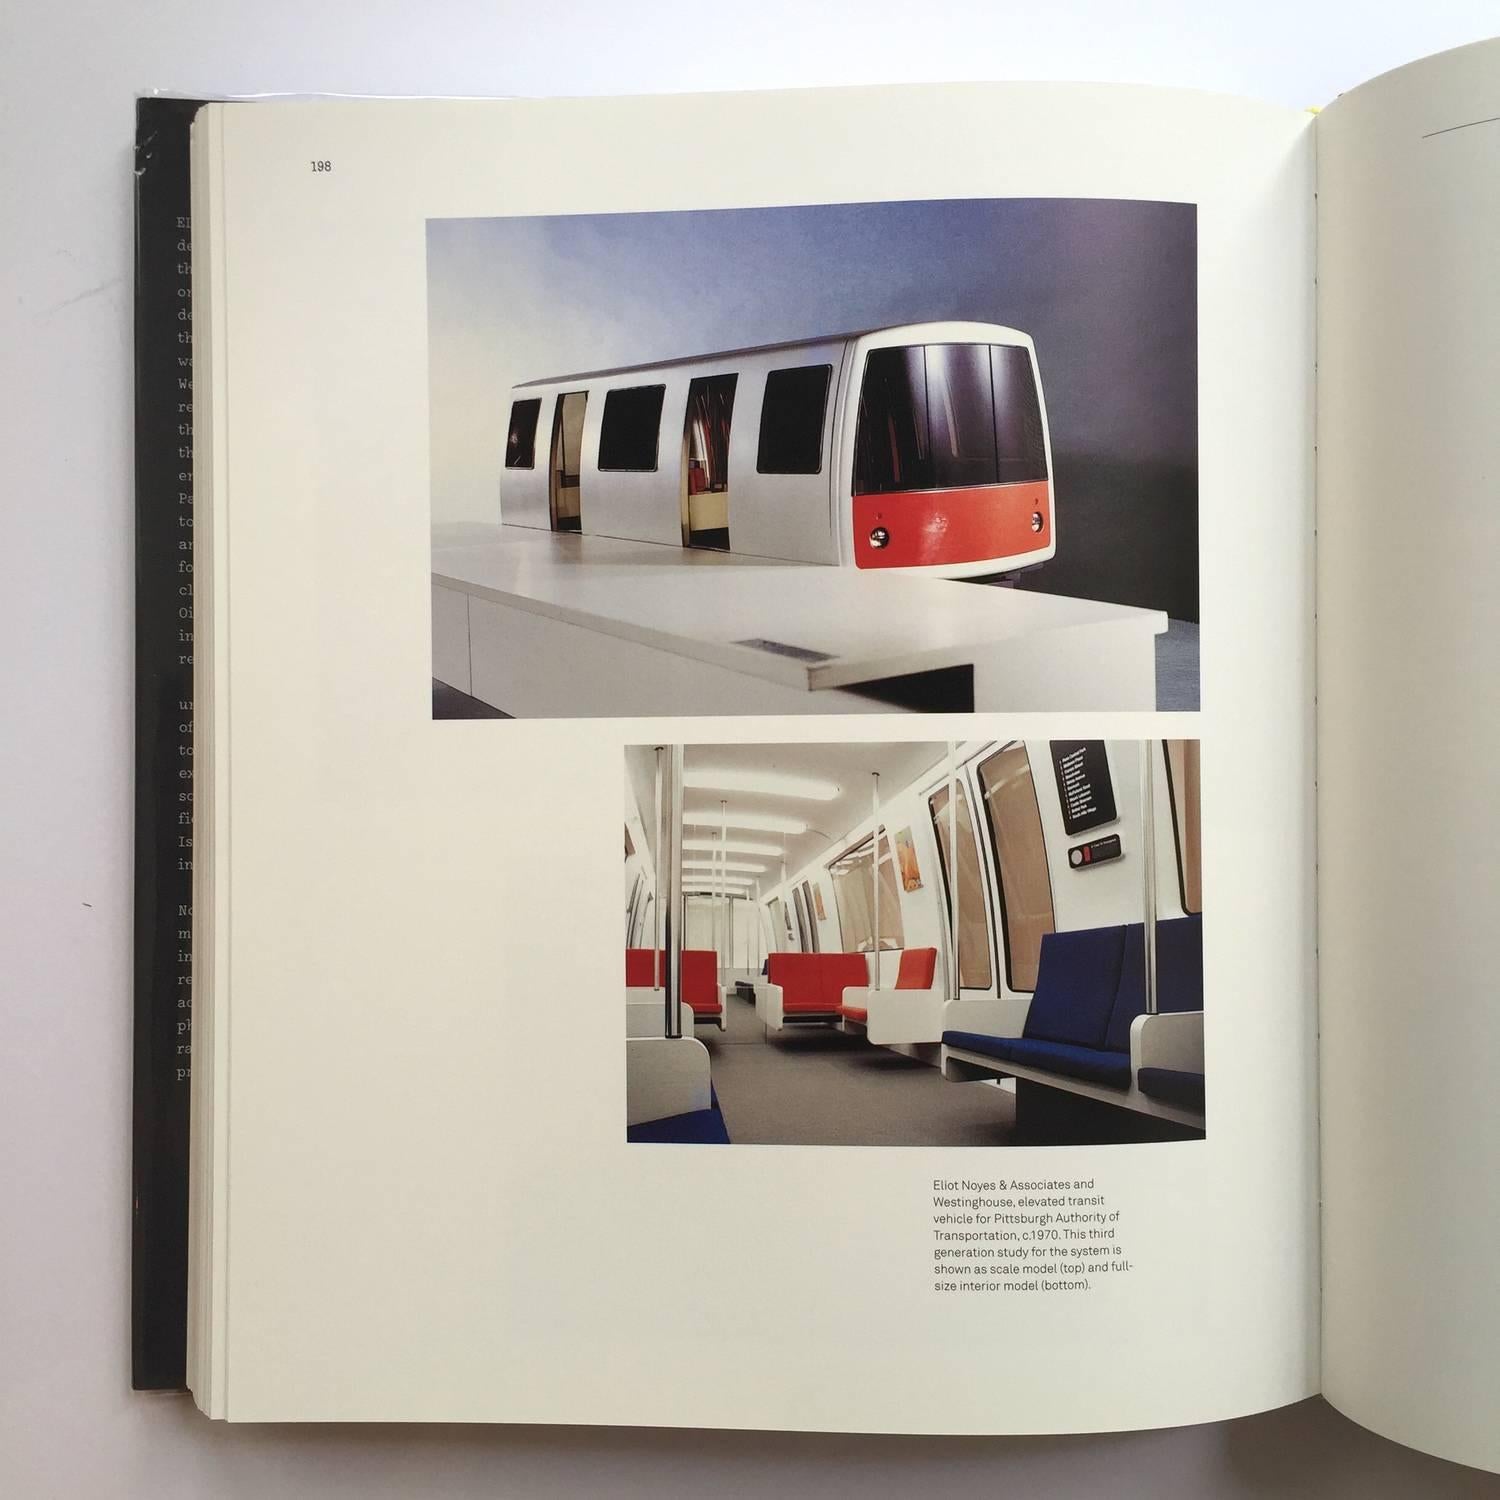 First edition, Phaidon Press, 2006. Hardcover

Eliot Noyes: A Pioneer of design and architecture in the age of American Modernism

This book presents Eliot Noyes' inspiring body of work with a graphic and informative quality that reflects the